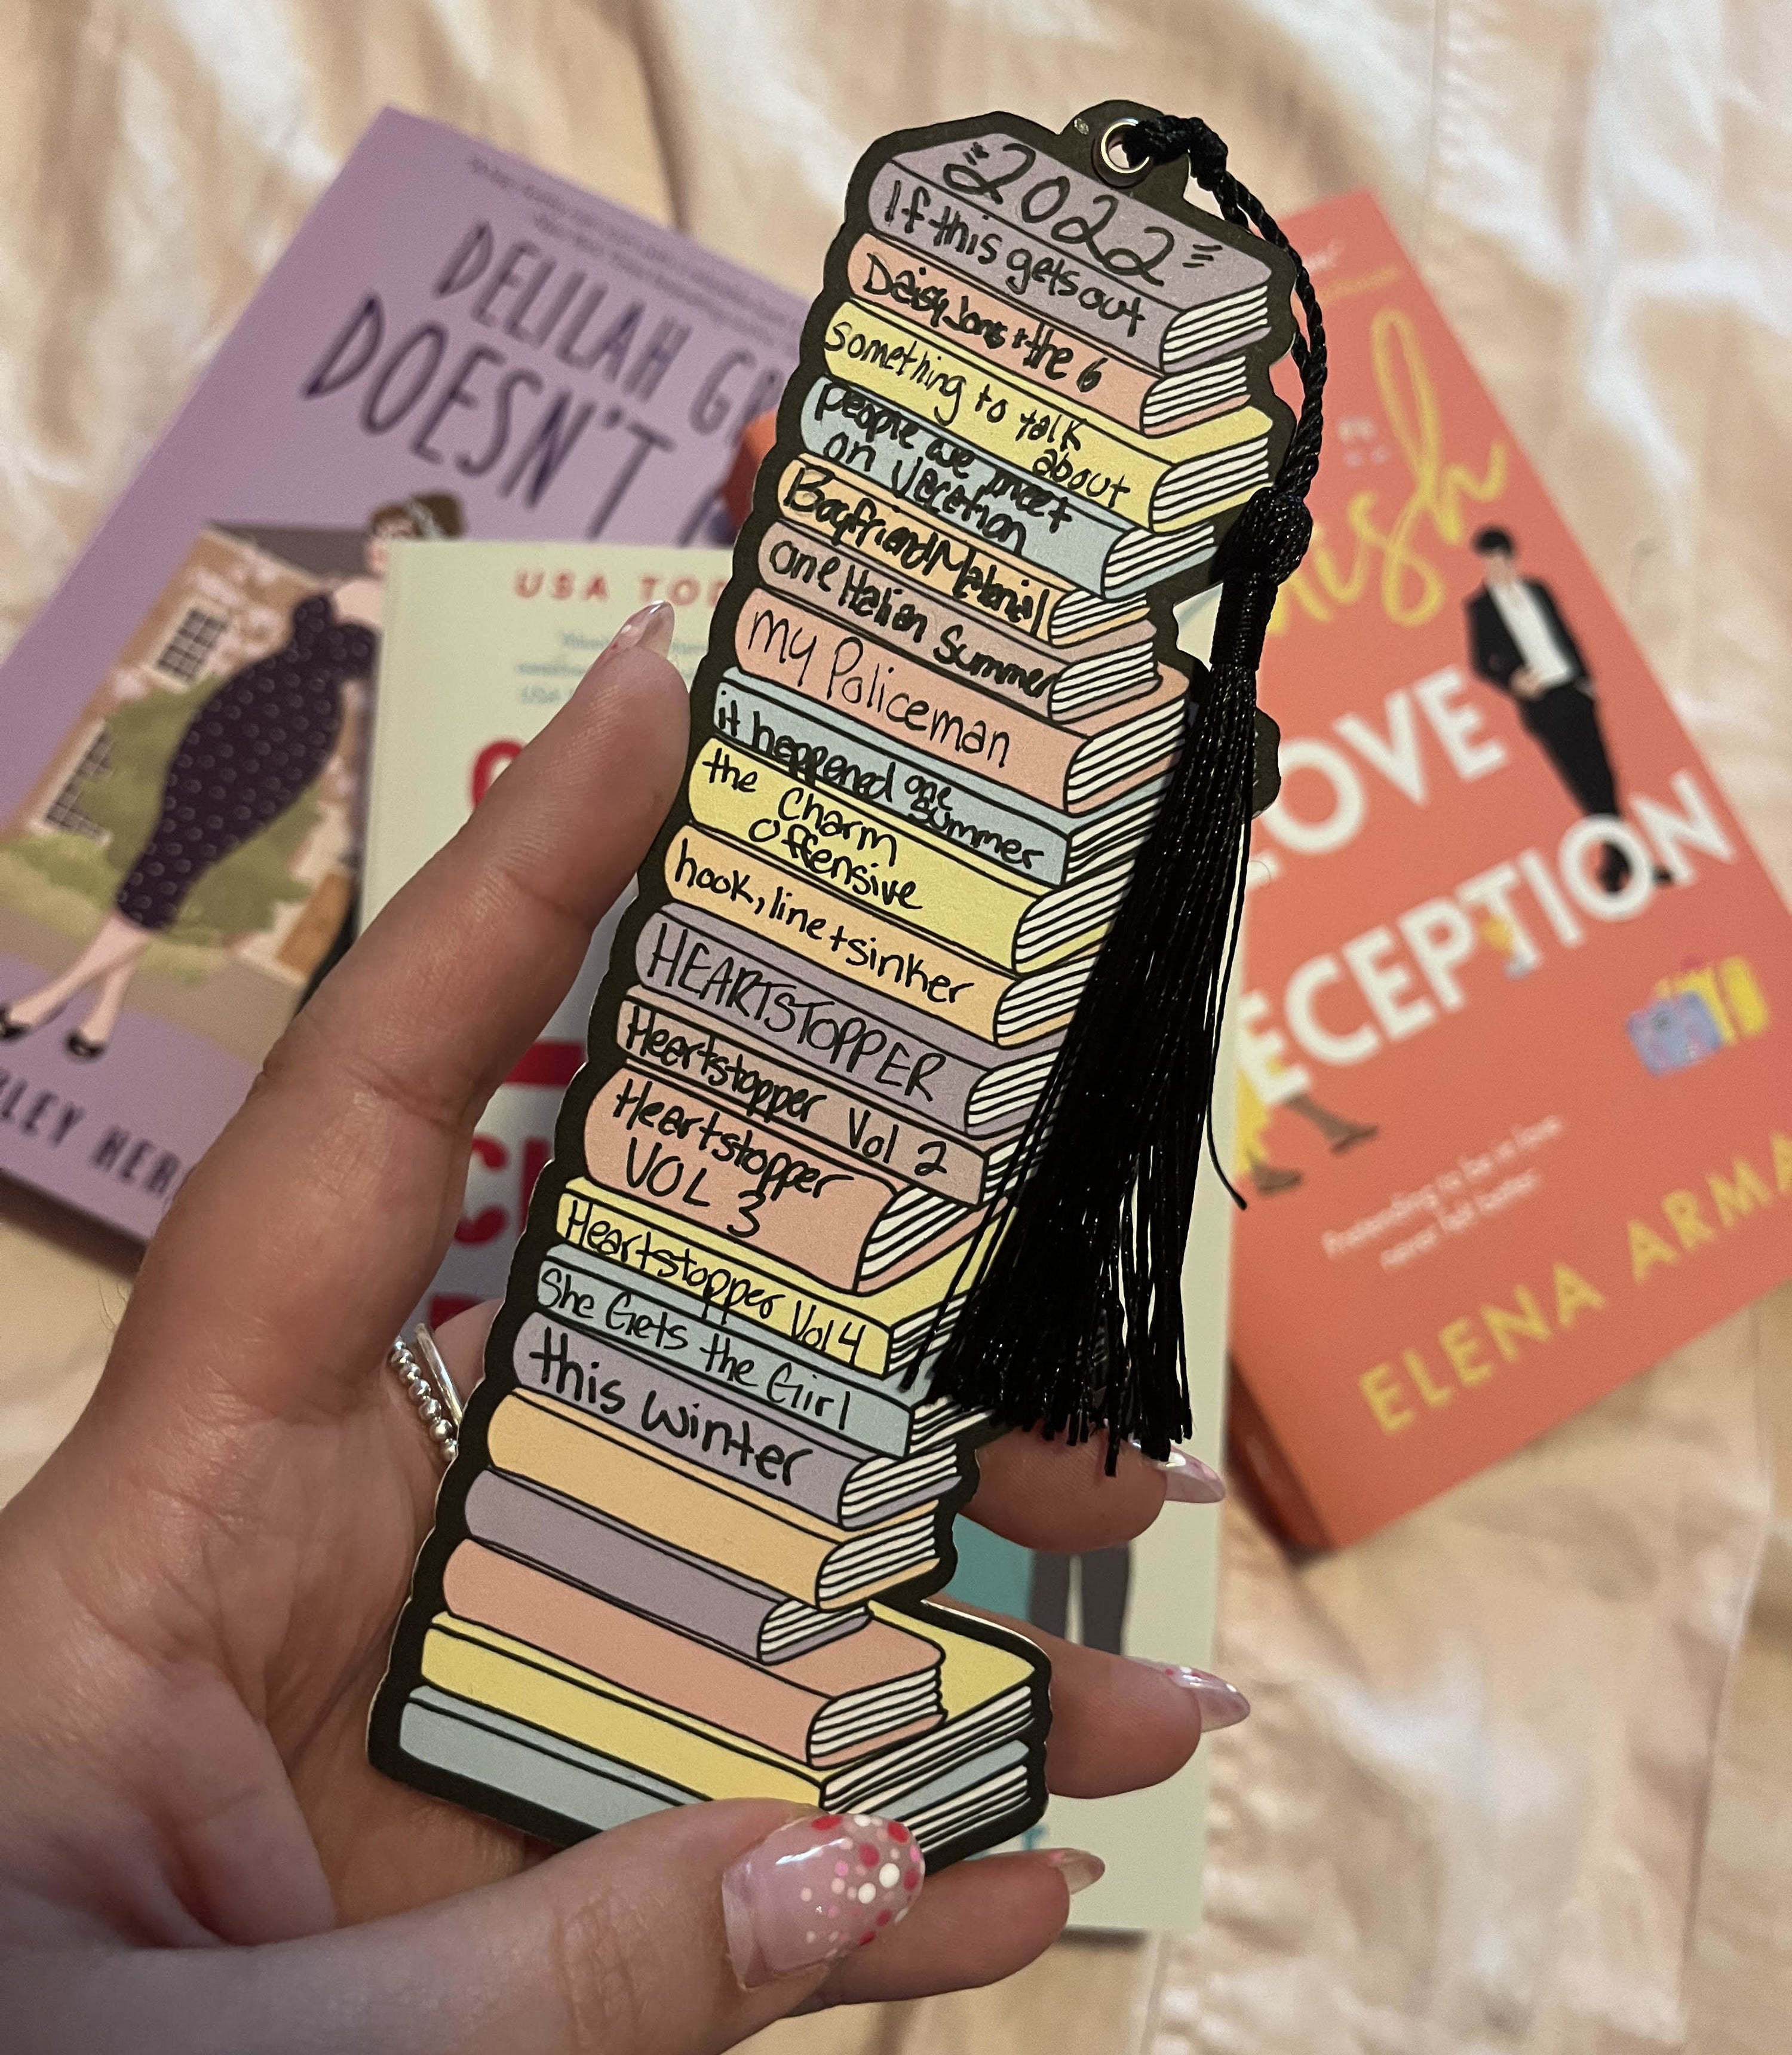 Bianca holding up the bookmark with all of the books she&#x27;s read written on it